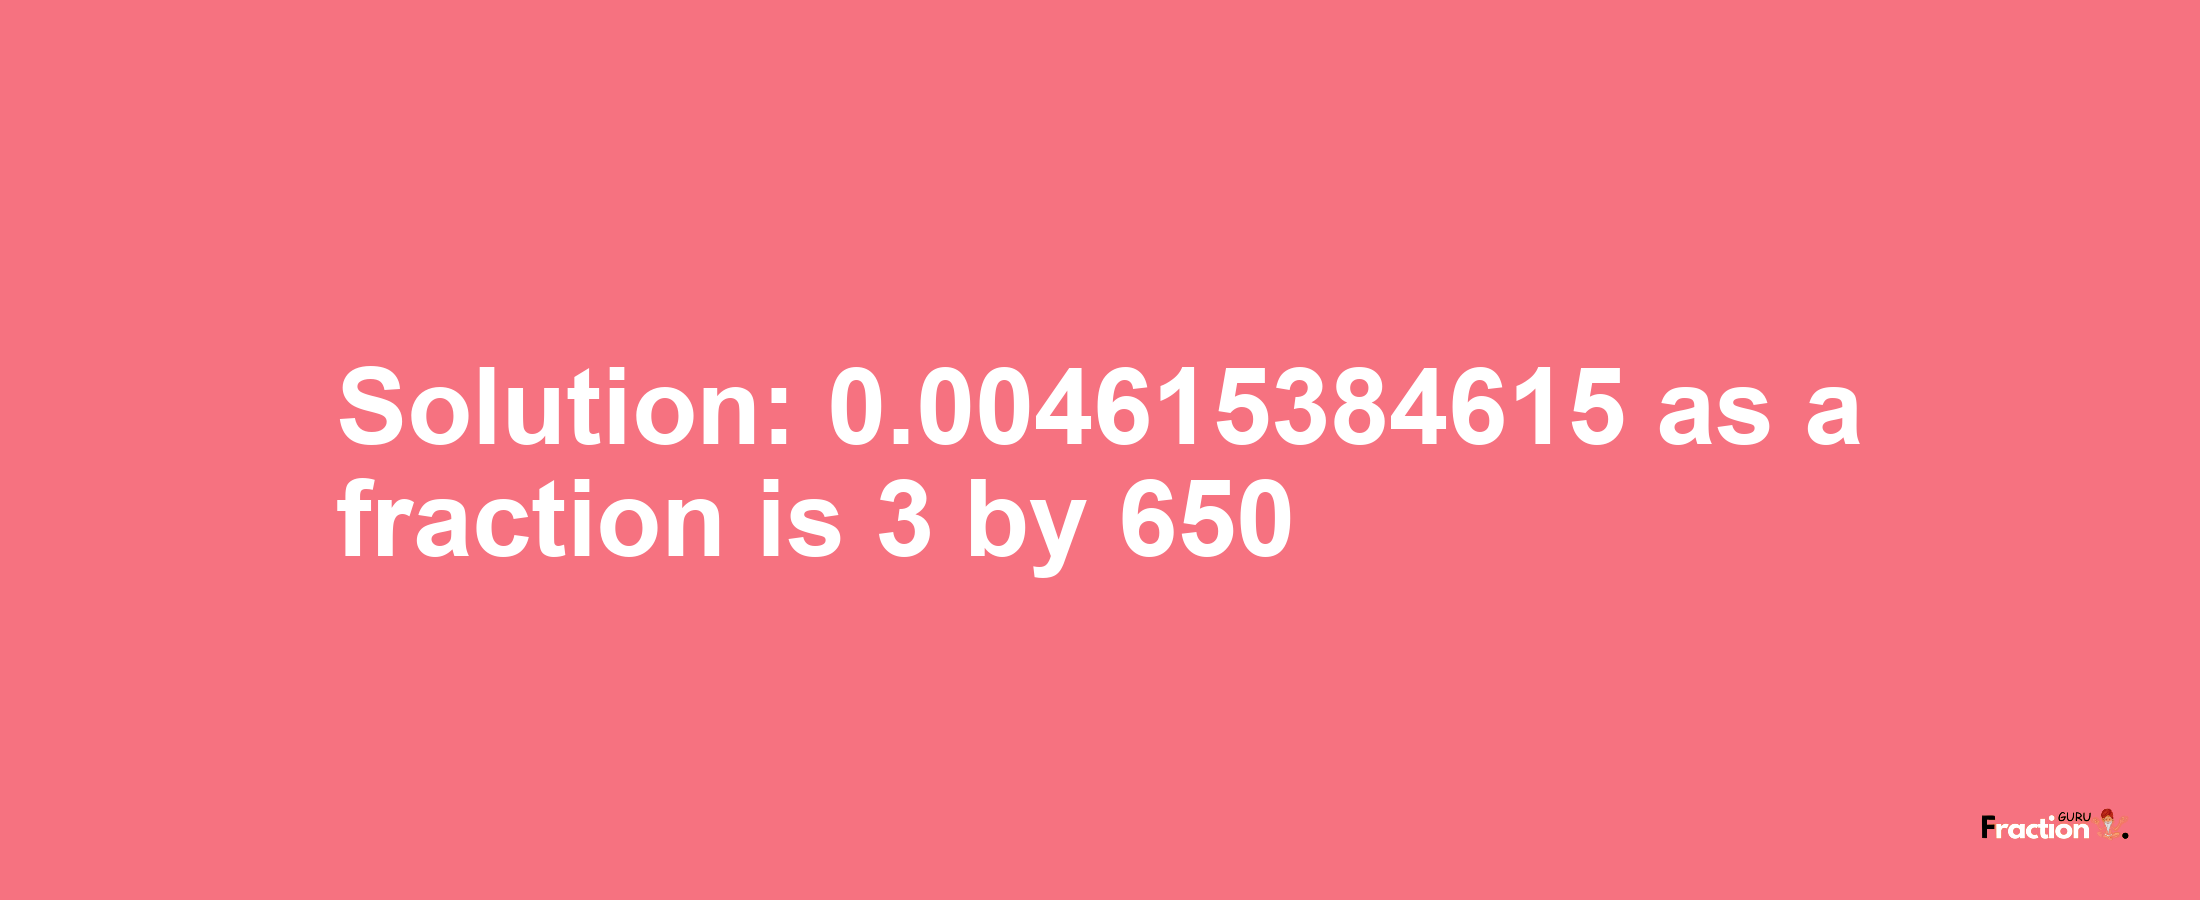 Solution:0.004615384615 as a fraction is 3/650